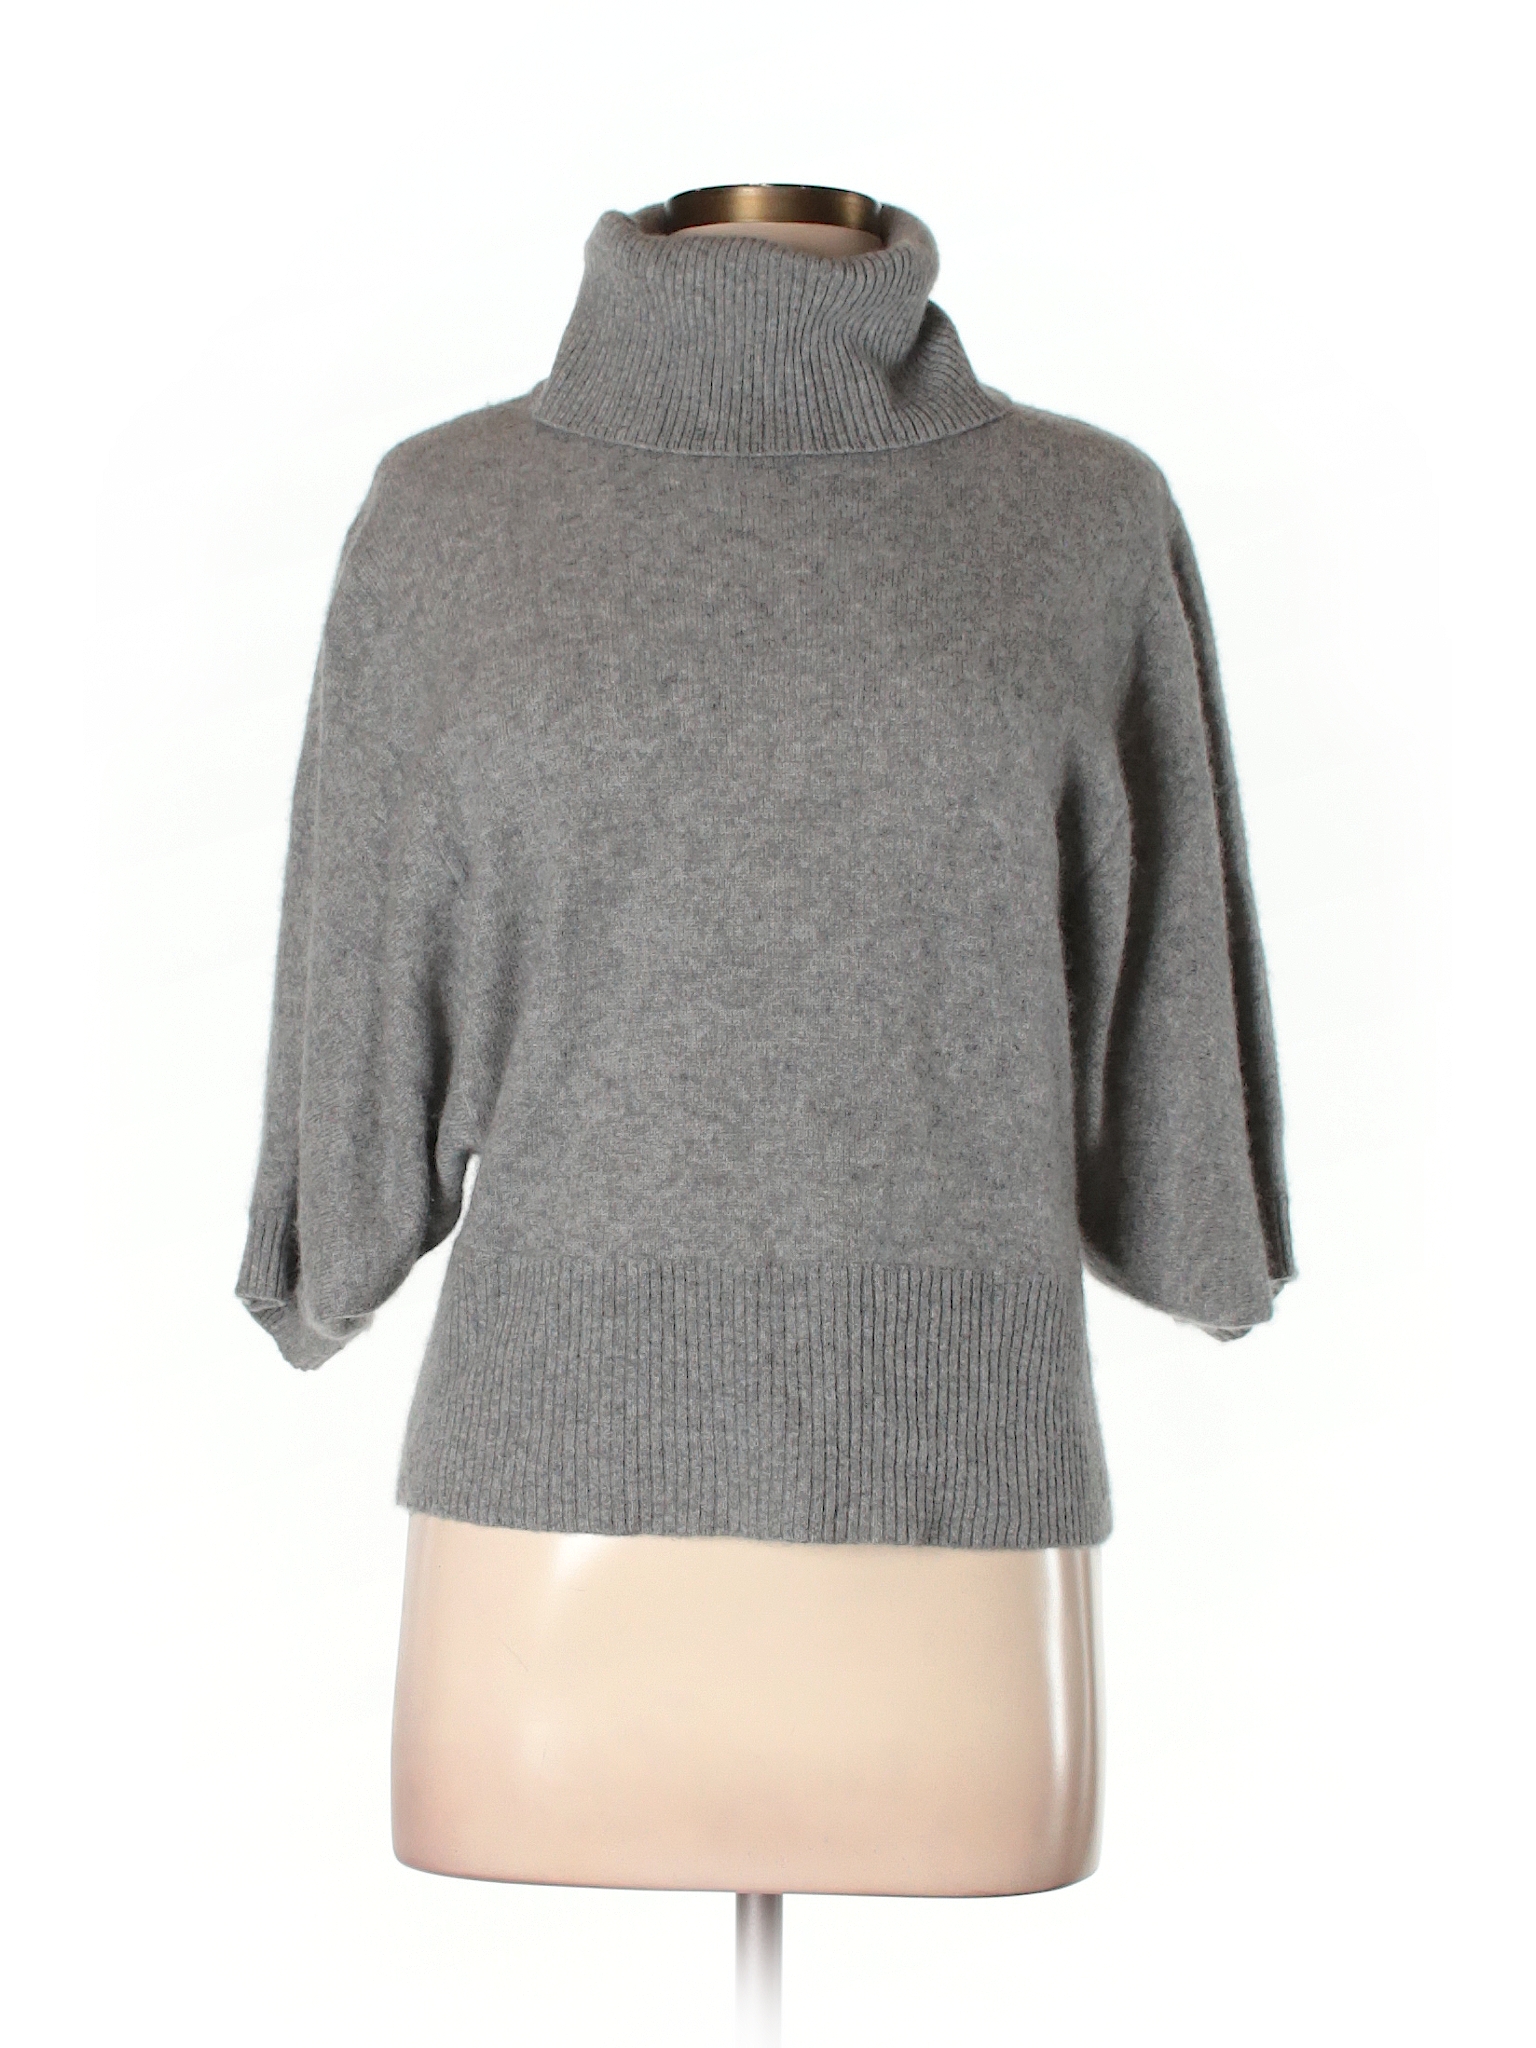 Cynthia Rowley TJX 100% Cashmere Solid Gray Cashmere Pullover Sweater ...